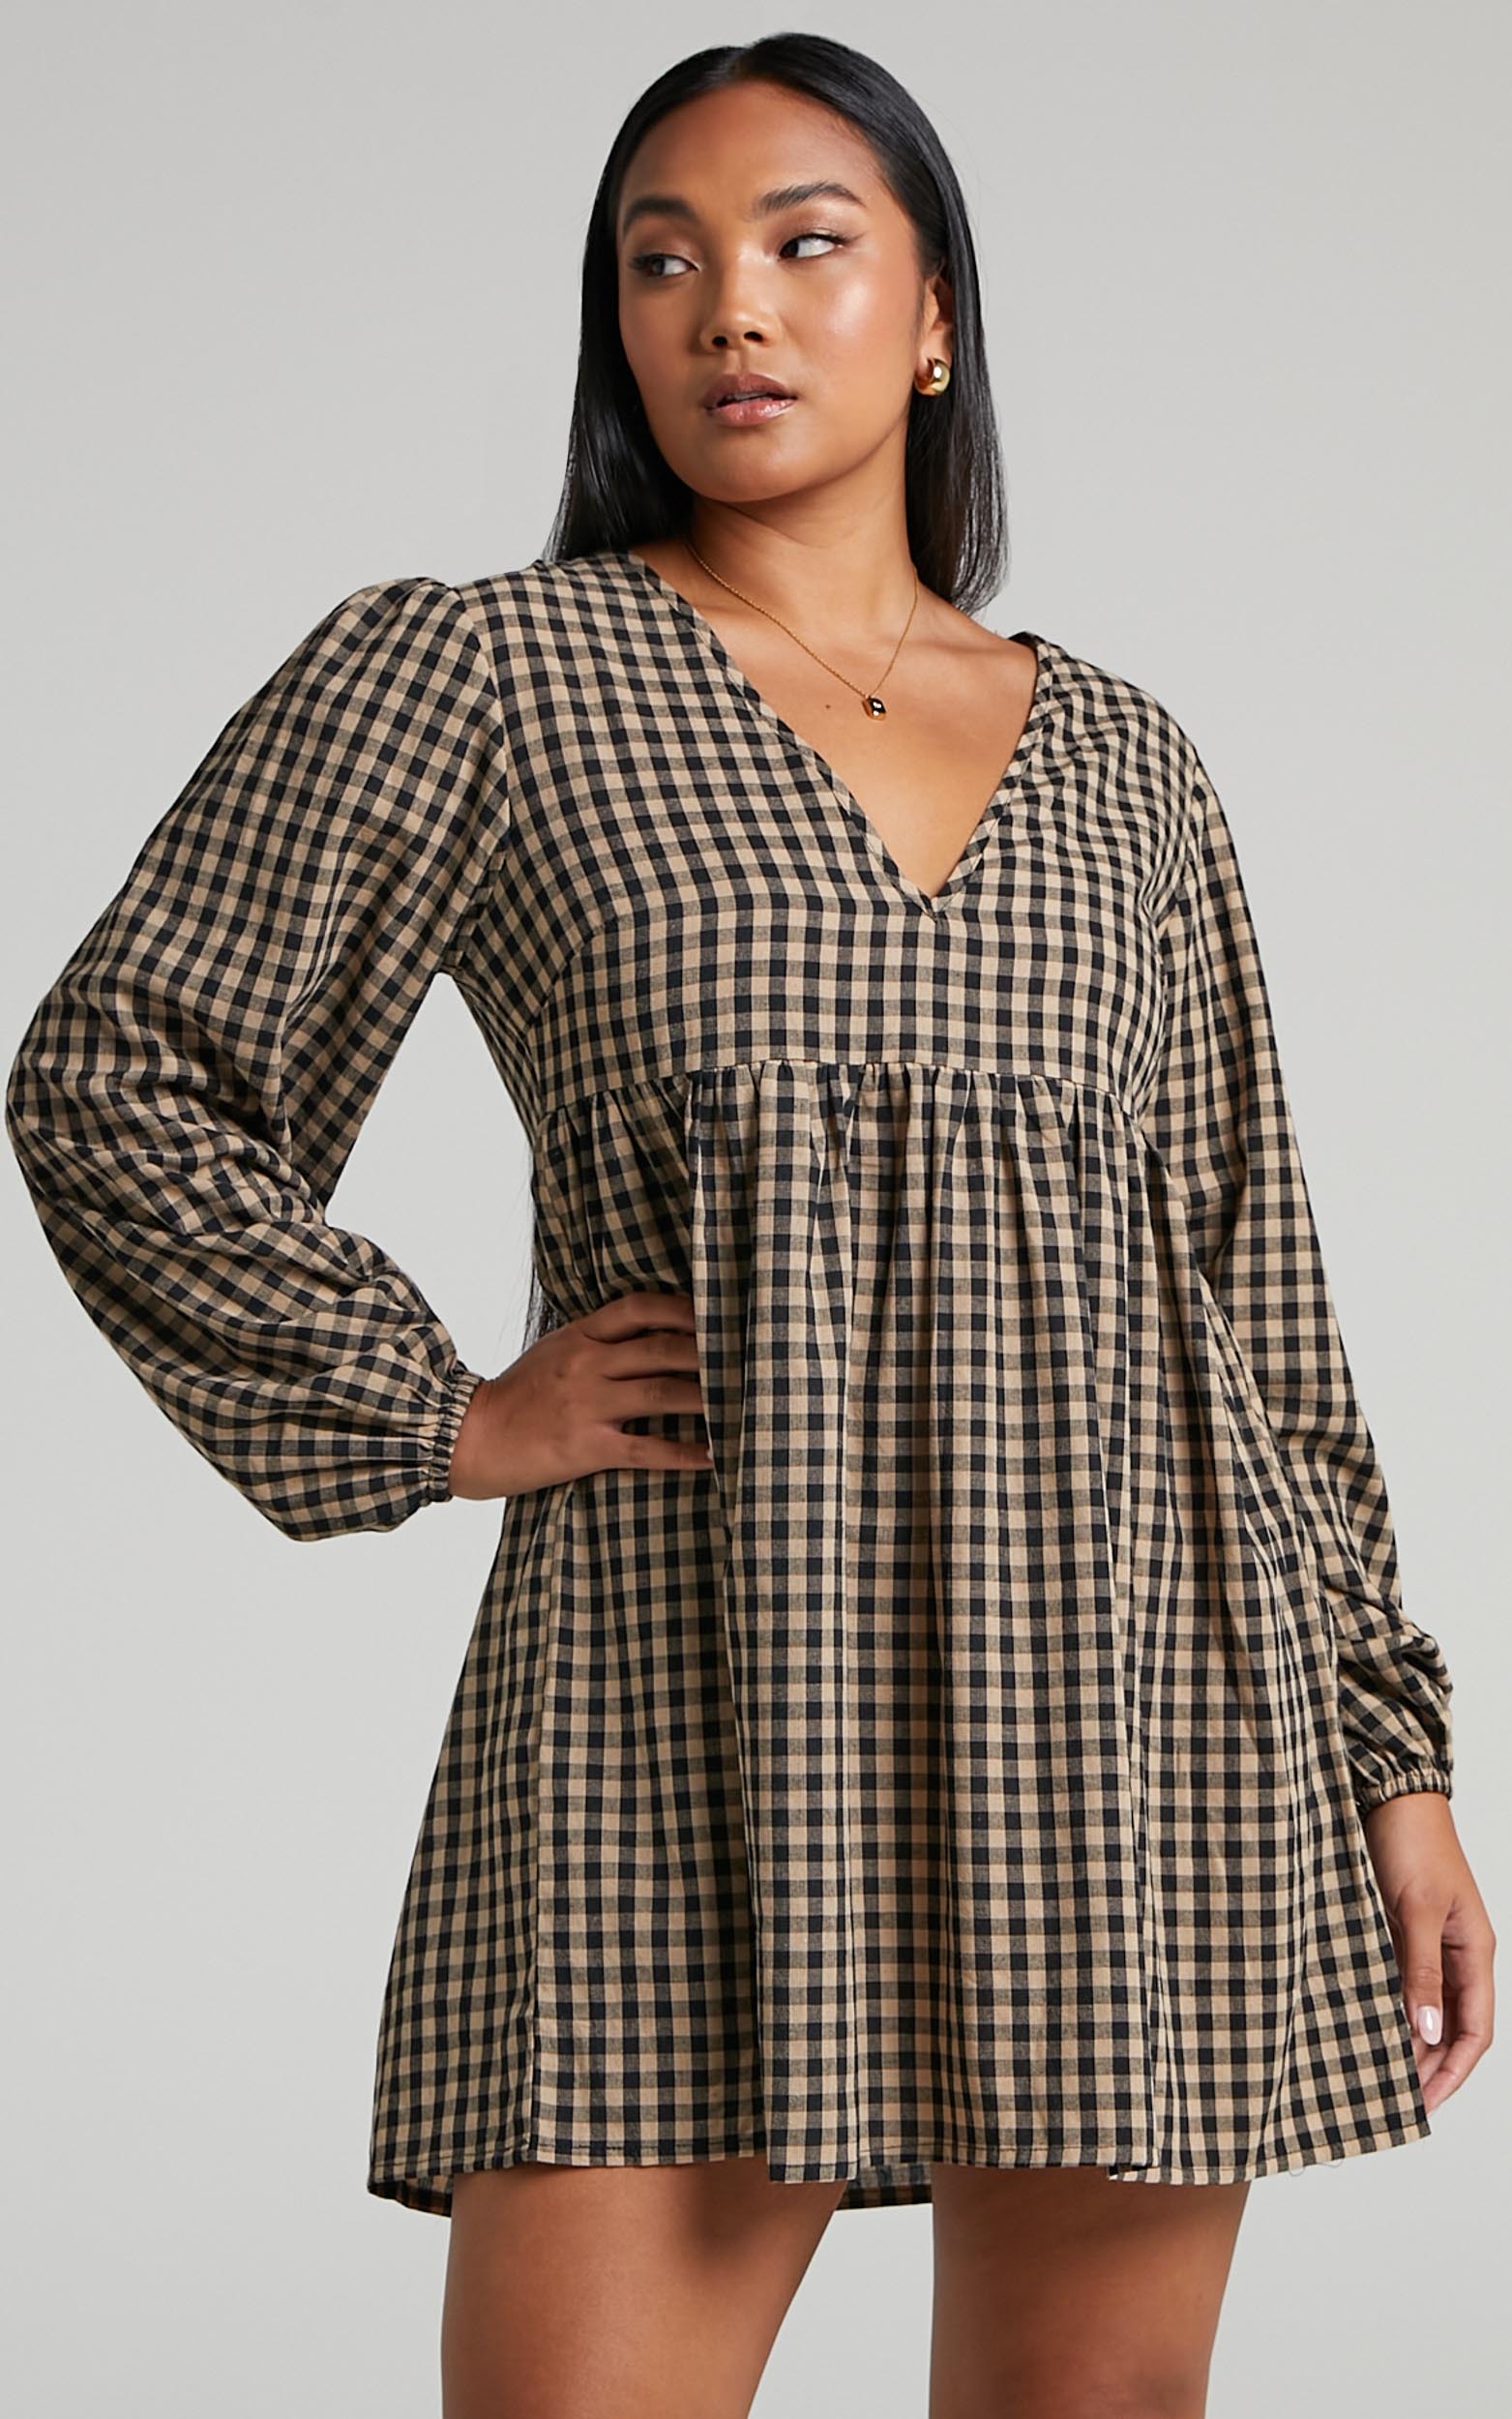 Kamrin Long Sleeve Mini Shift Dress in Gingham - 04, BLK1, hi-res image number null